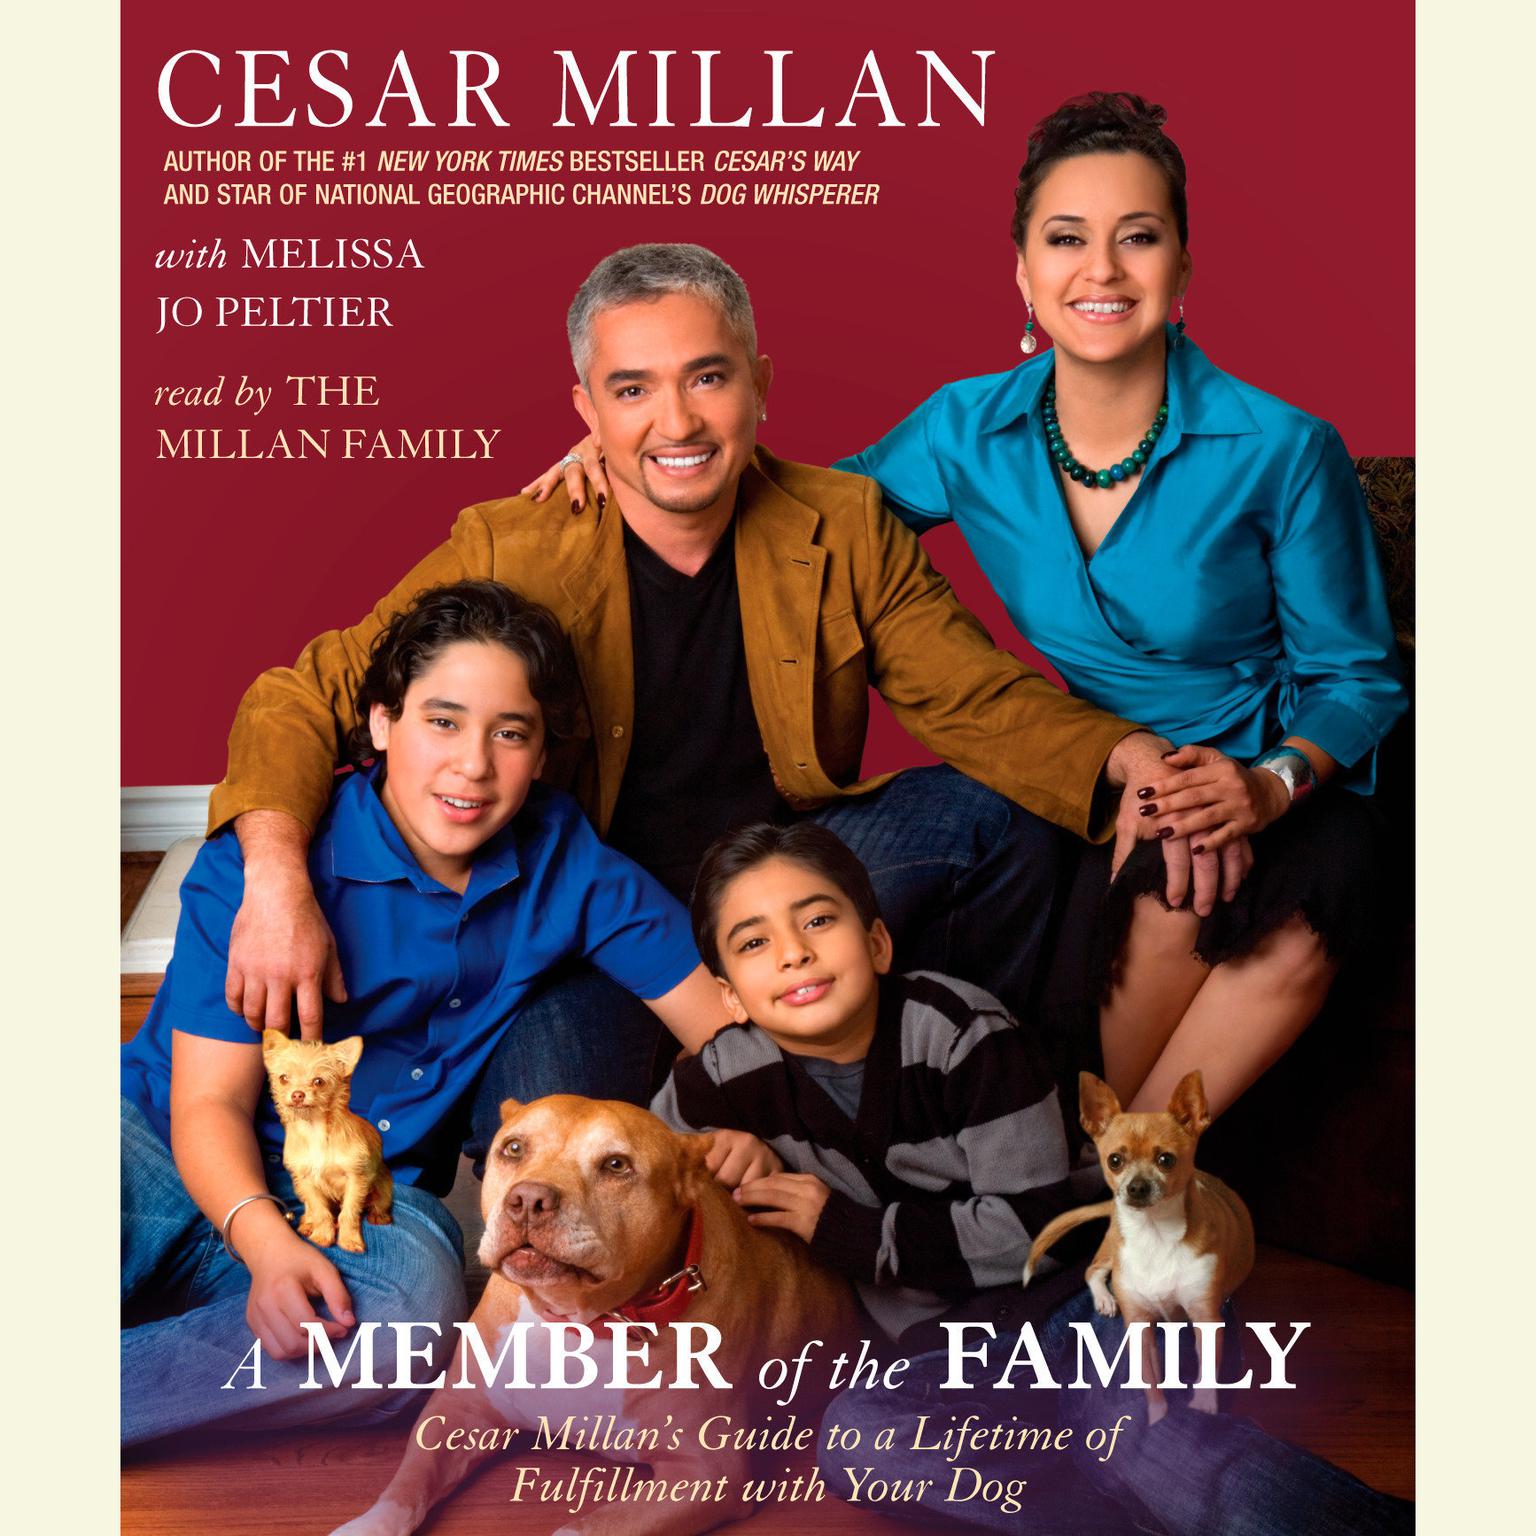 A Member of the Family (Abridged): Cesar Millans Guide to a Lifetime of Fulfillment with Your Dog Audiobook, by Cesar Millan